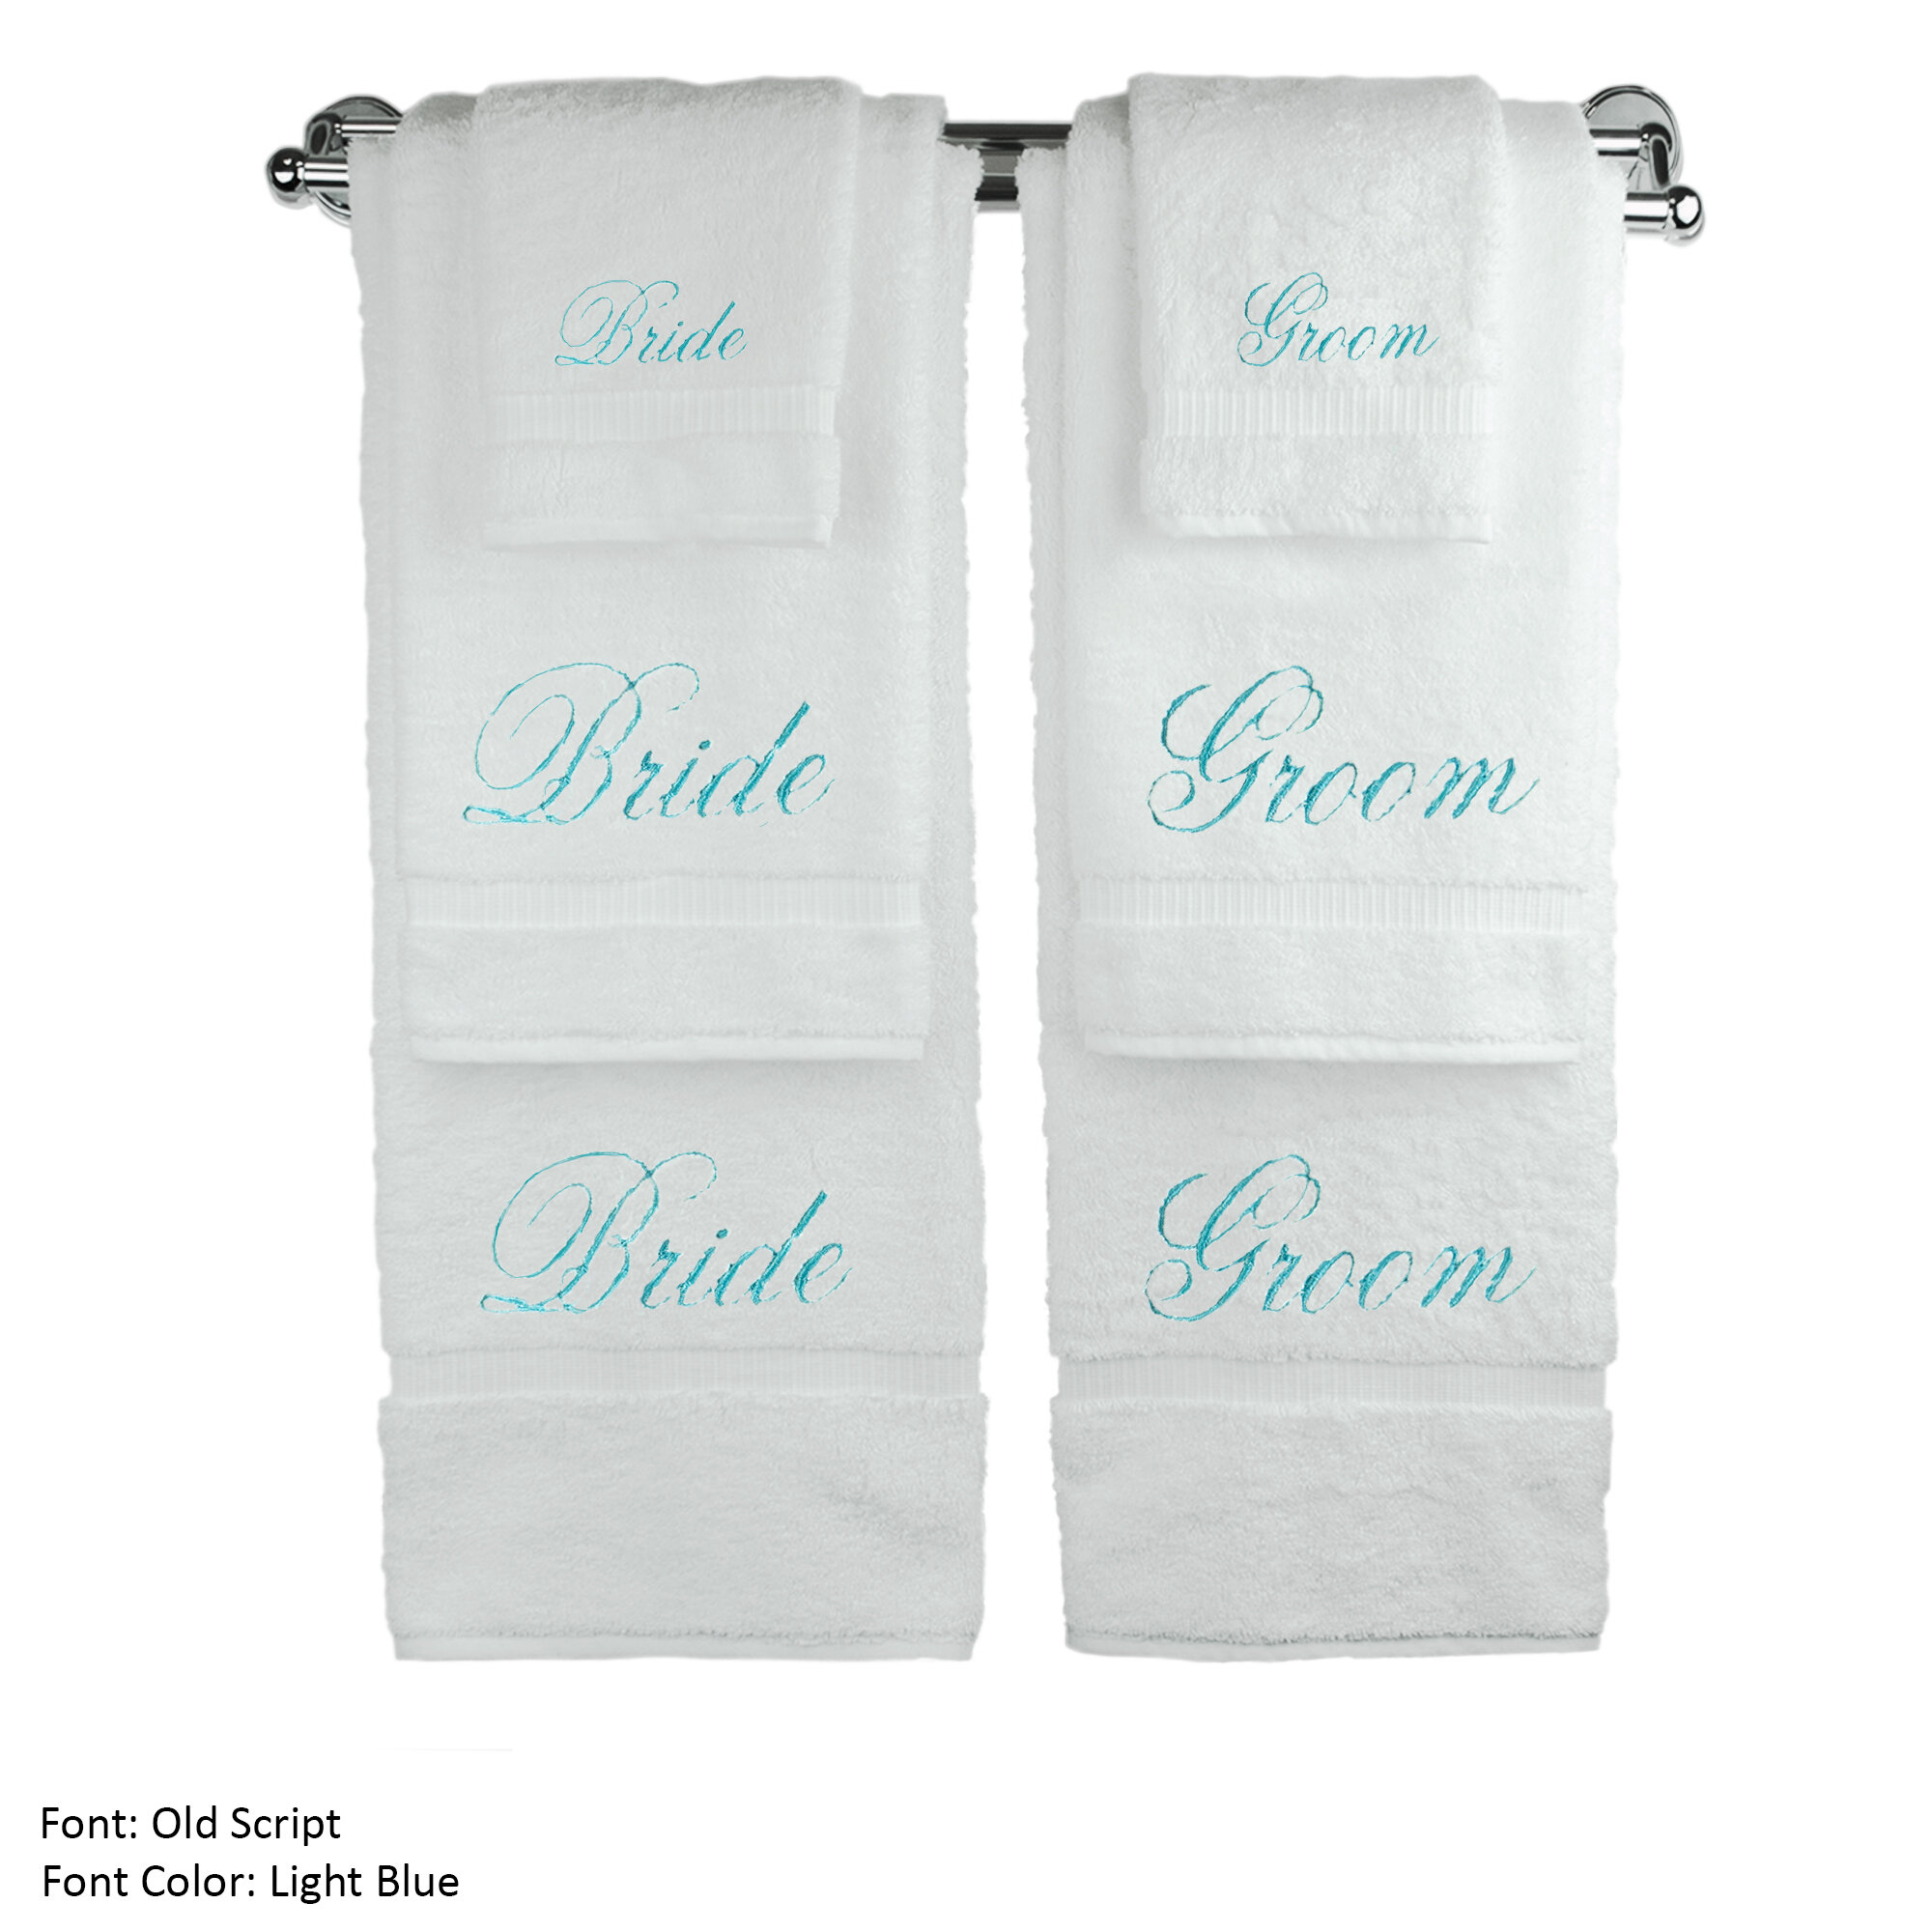 Great Bay Home Cotton Hotel & Spa Quality Quick-Dry Towel Set (Bath Towel  (4-Pack), Spa Blue) 